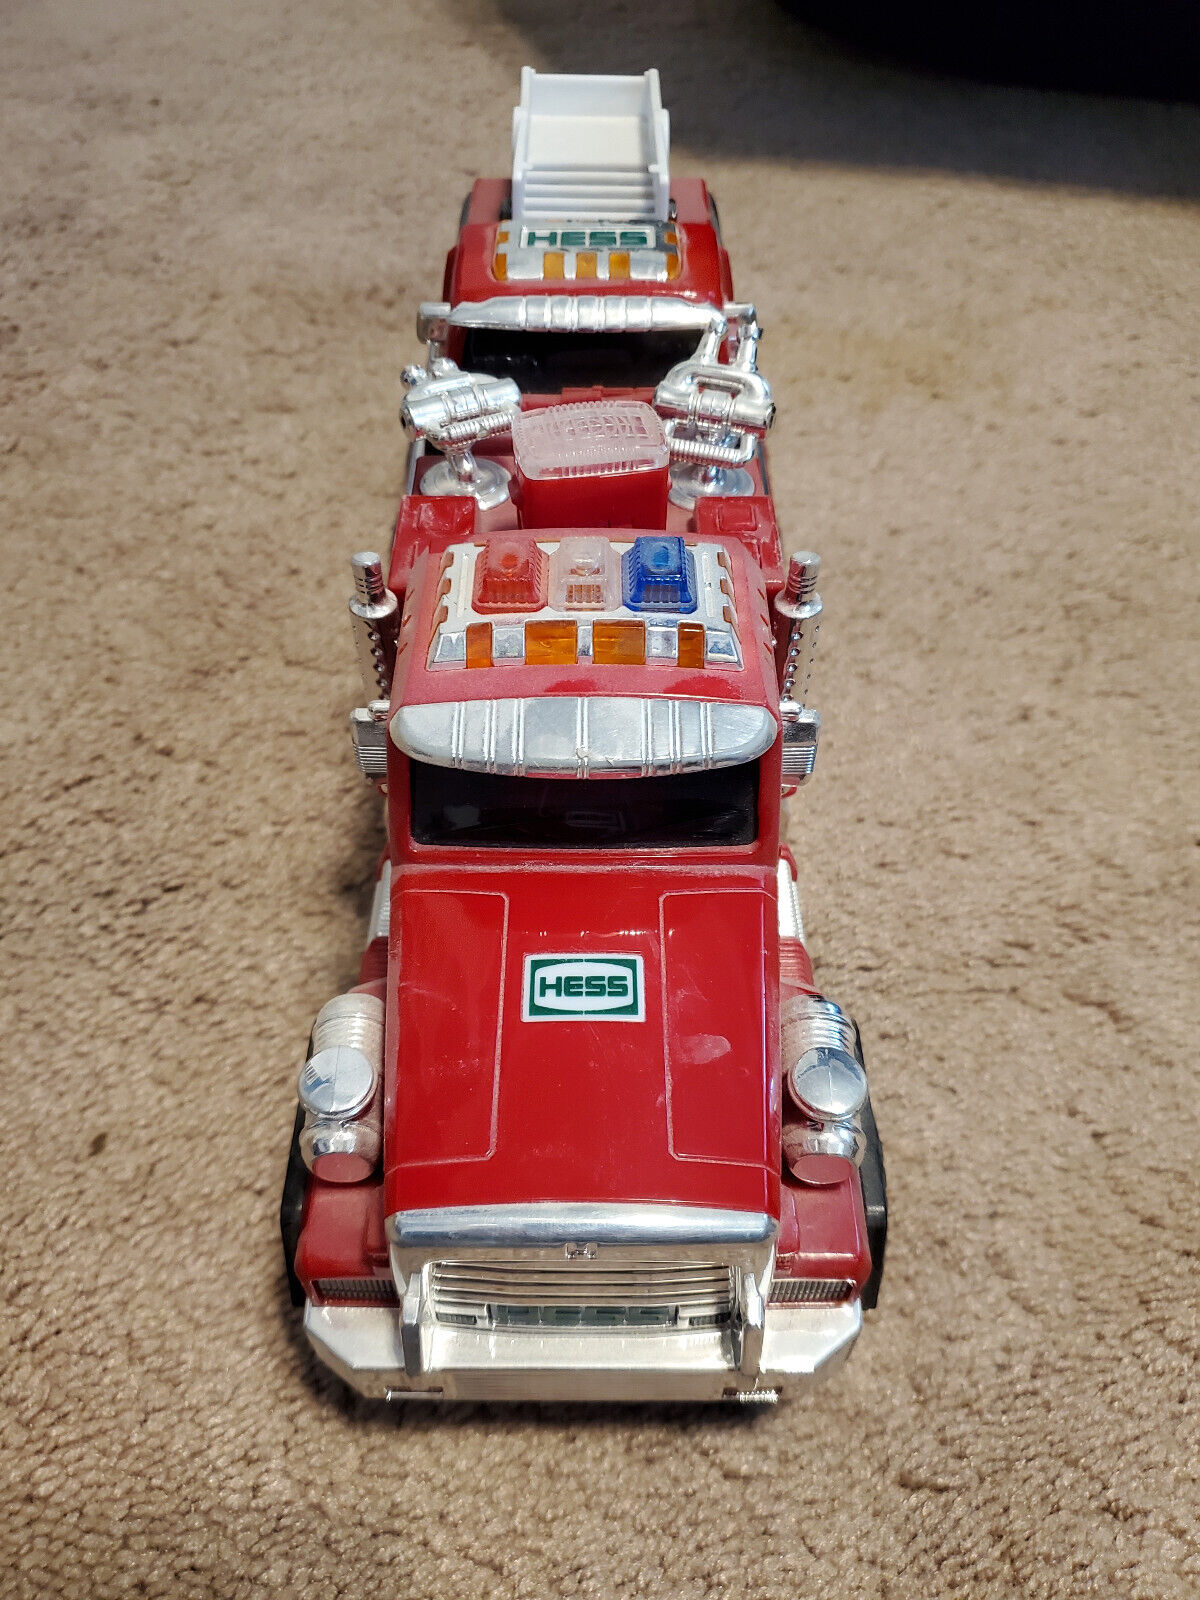 Hess Christmas Toy Truck 2015, Firetruck with Ladder Car, Loose, See Description